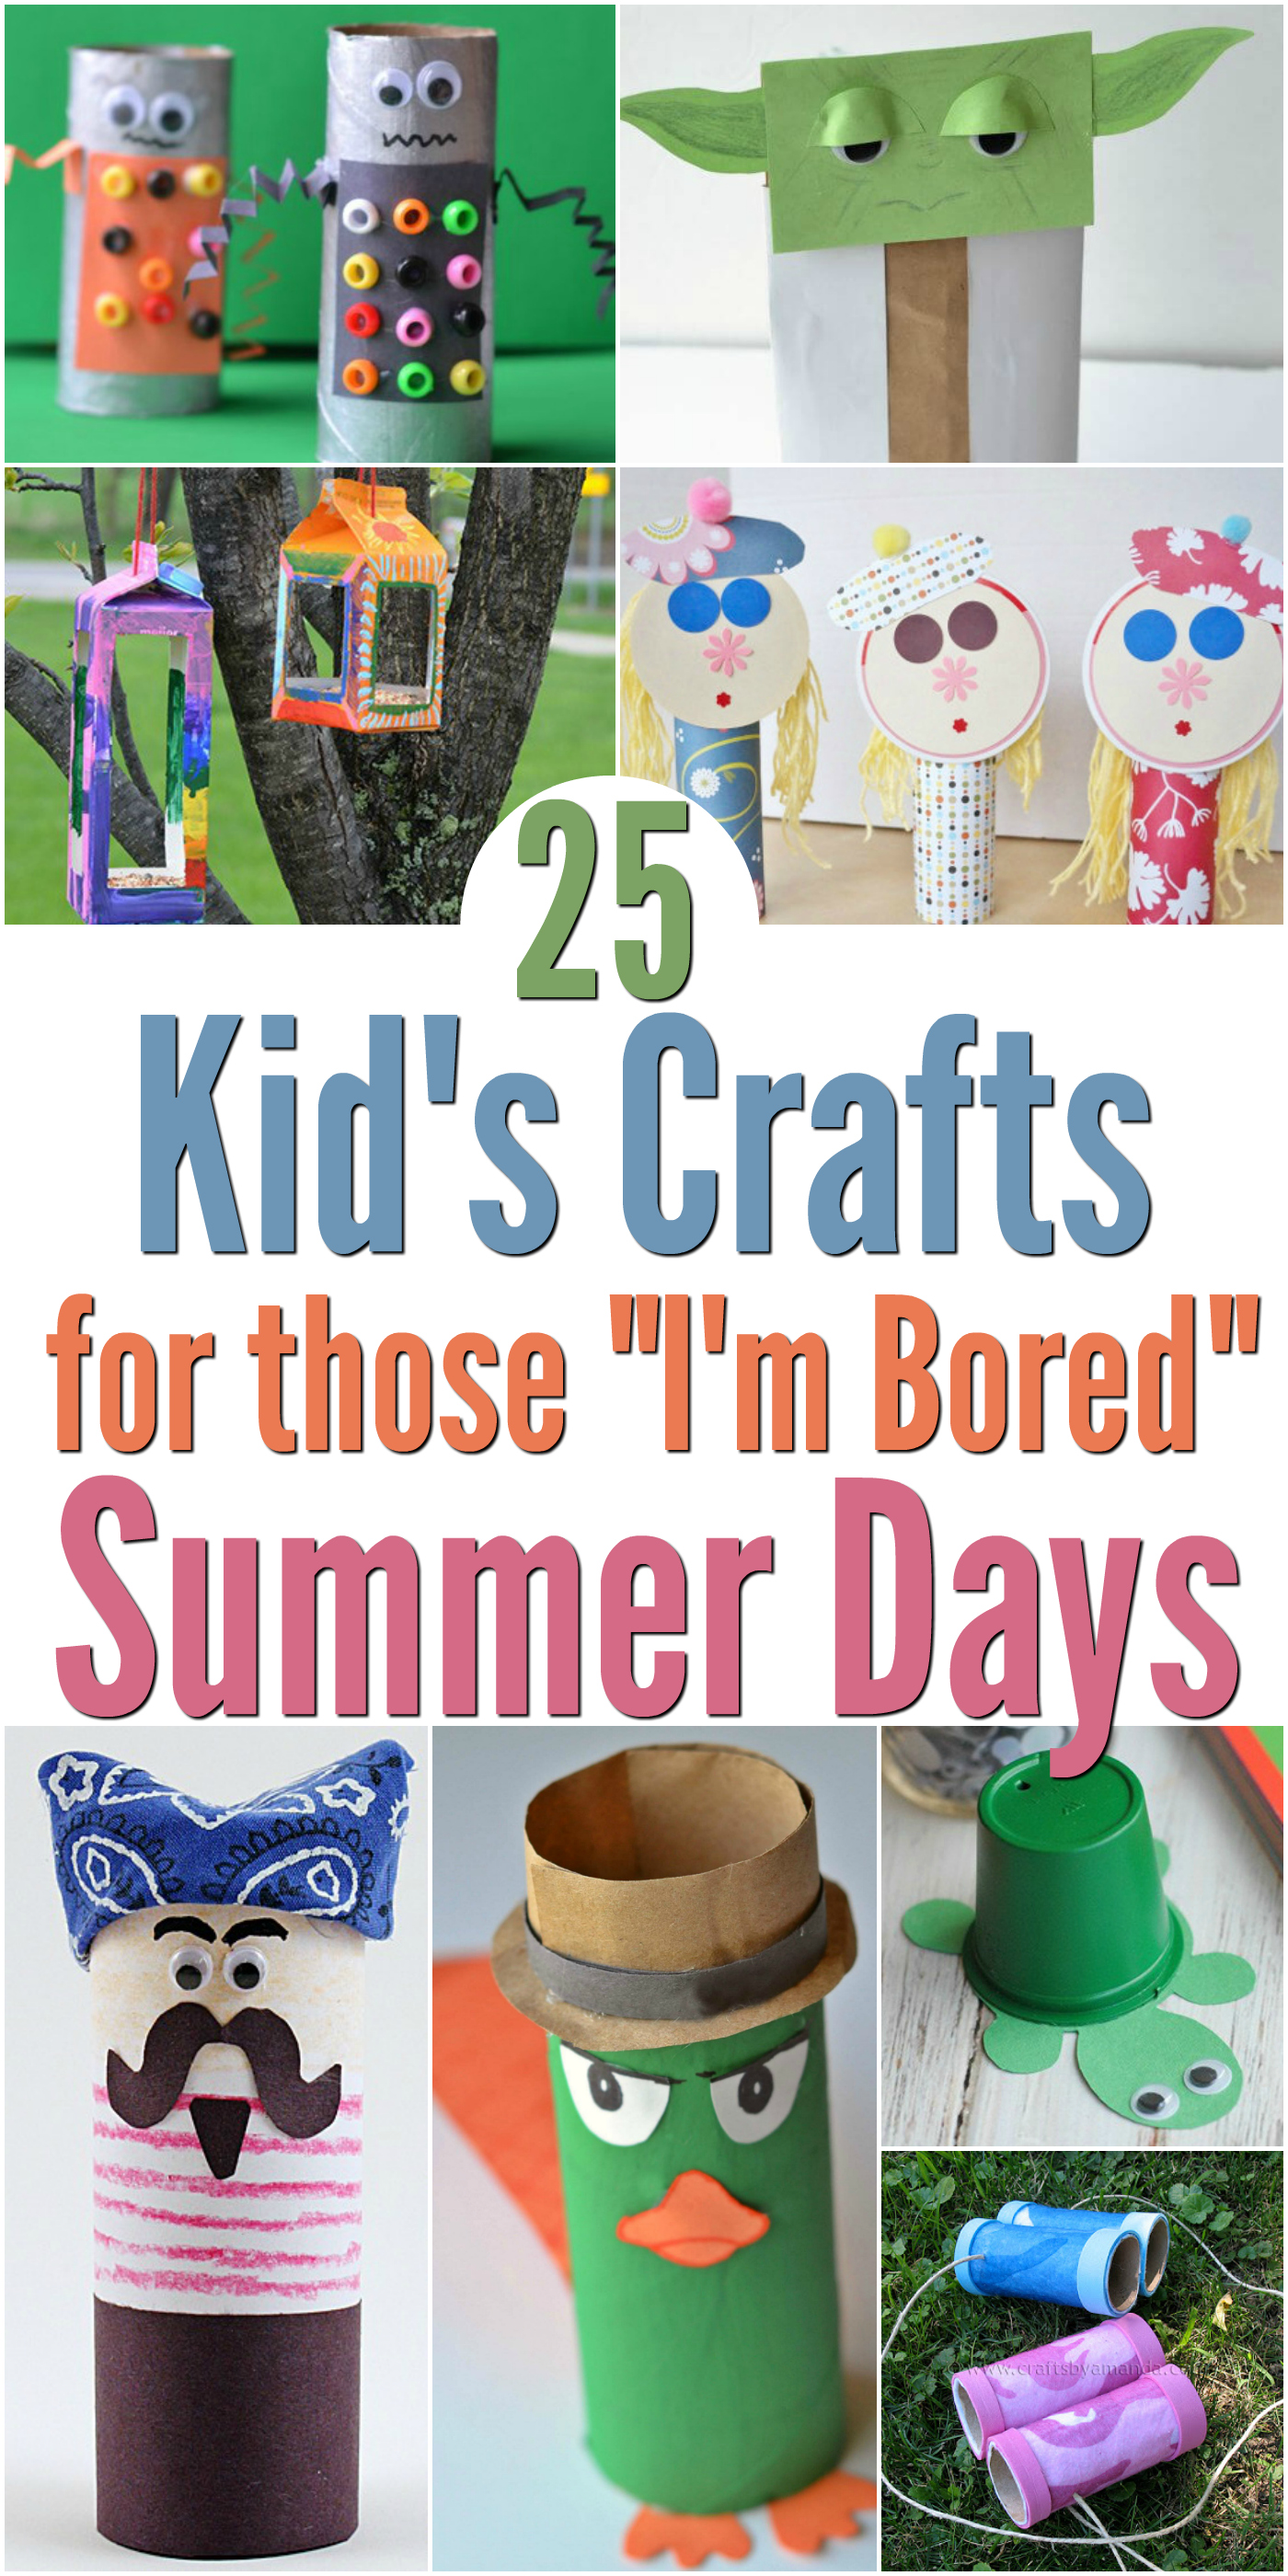 summer craft ideas for kids to make